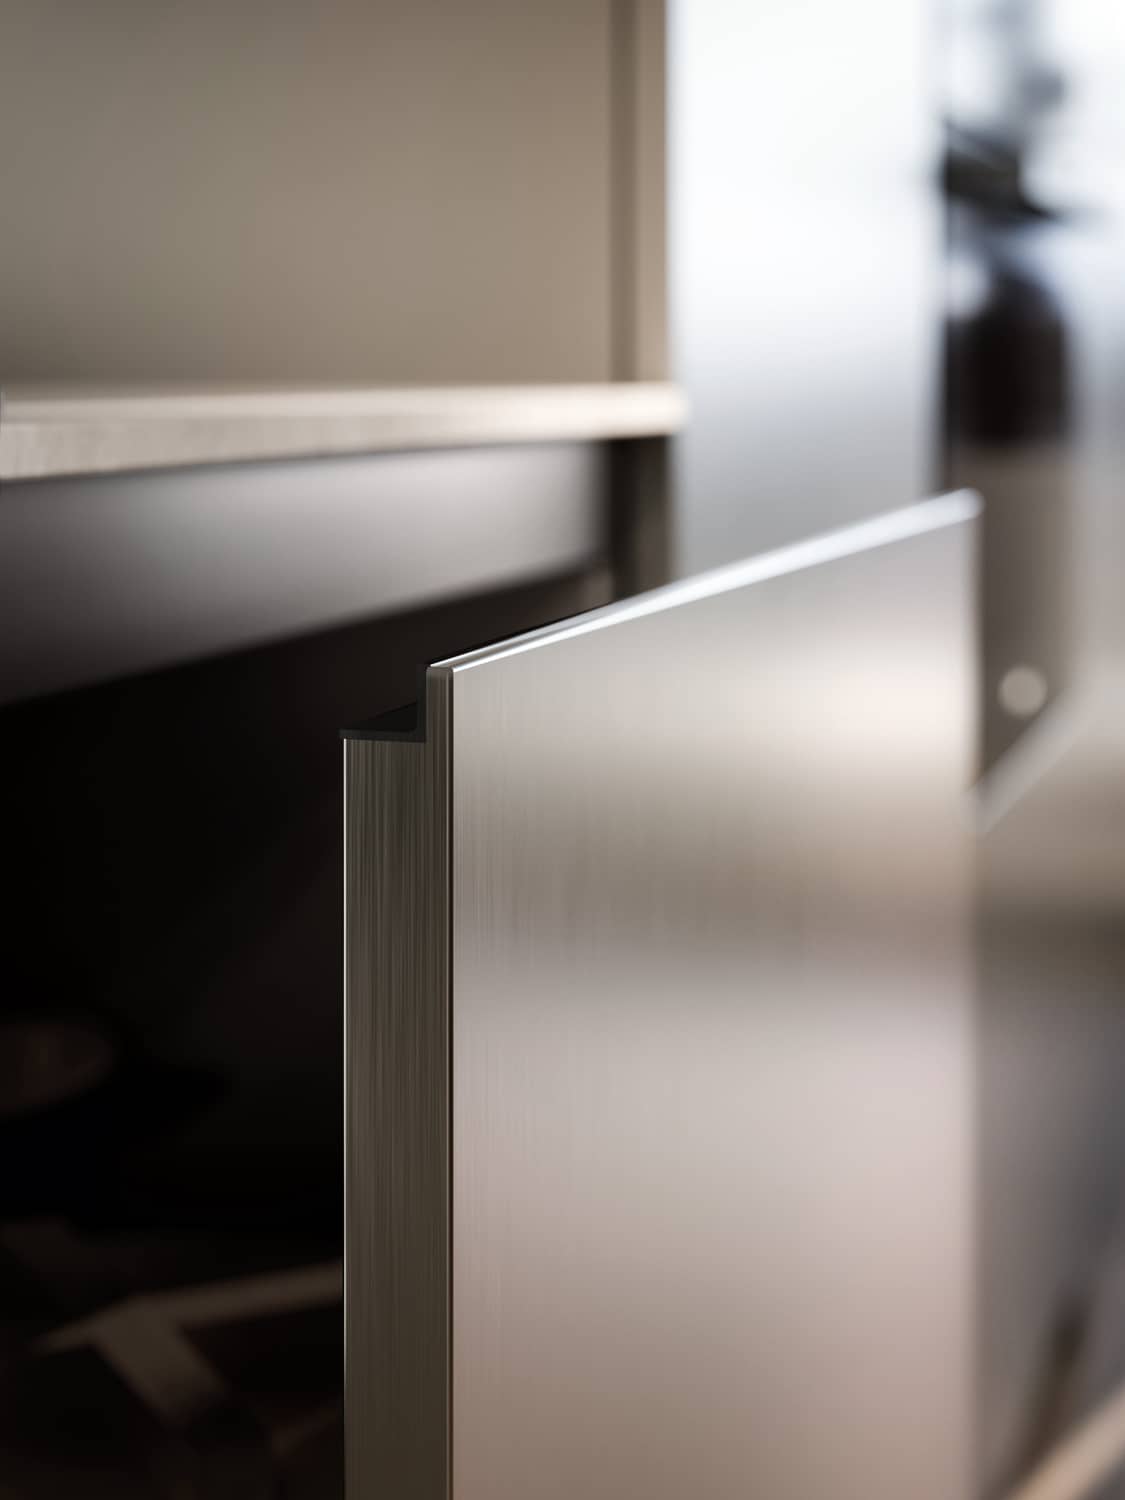 Detail of the Yota cabinet door in Ambra metallic lacquer with integrated Zeta handle.